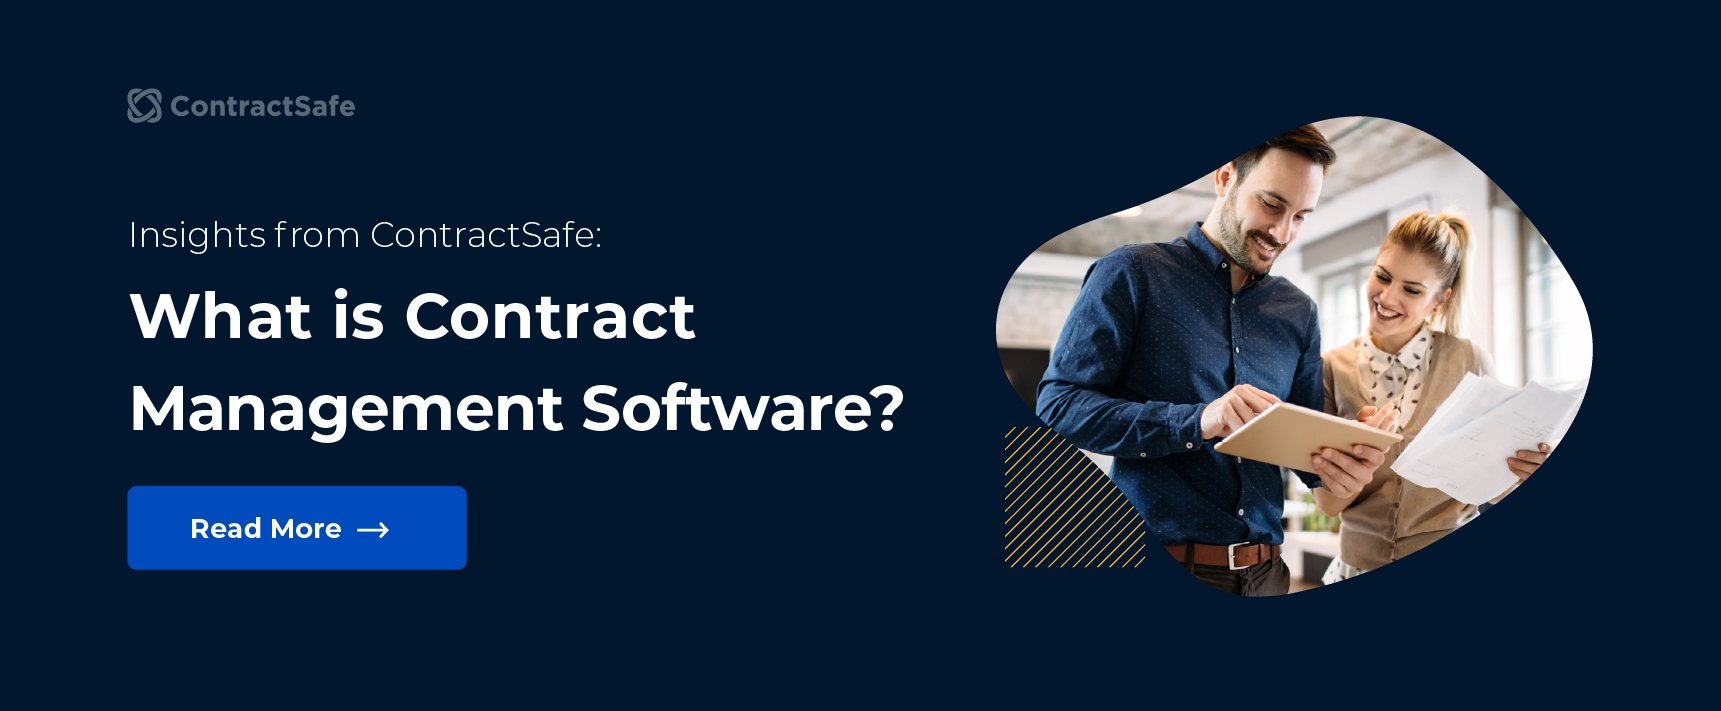 ContractSafe-Blog-6-Best-Practices-for-Effective-Contract-Management-IMAGES-6